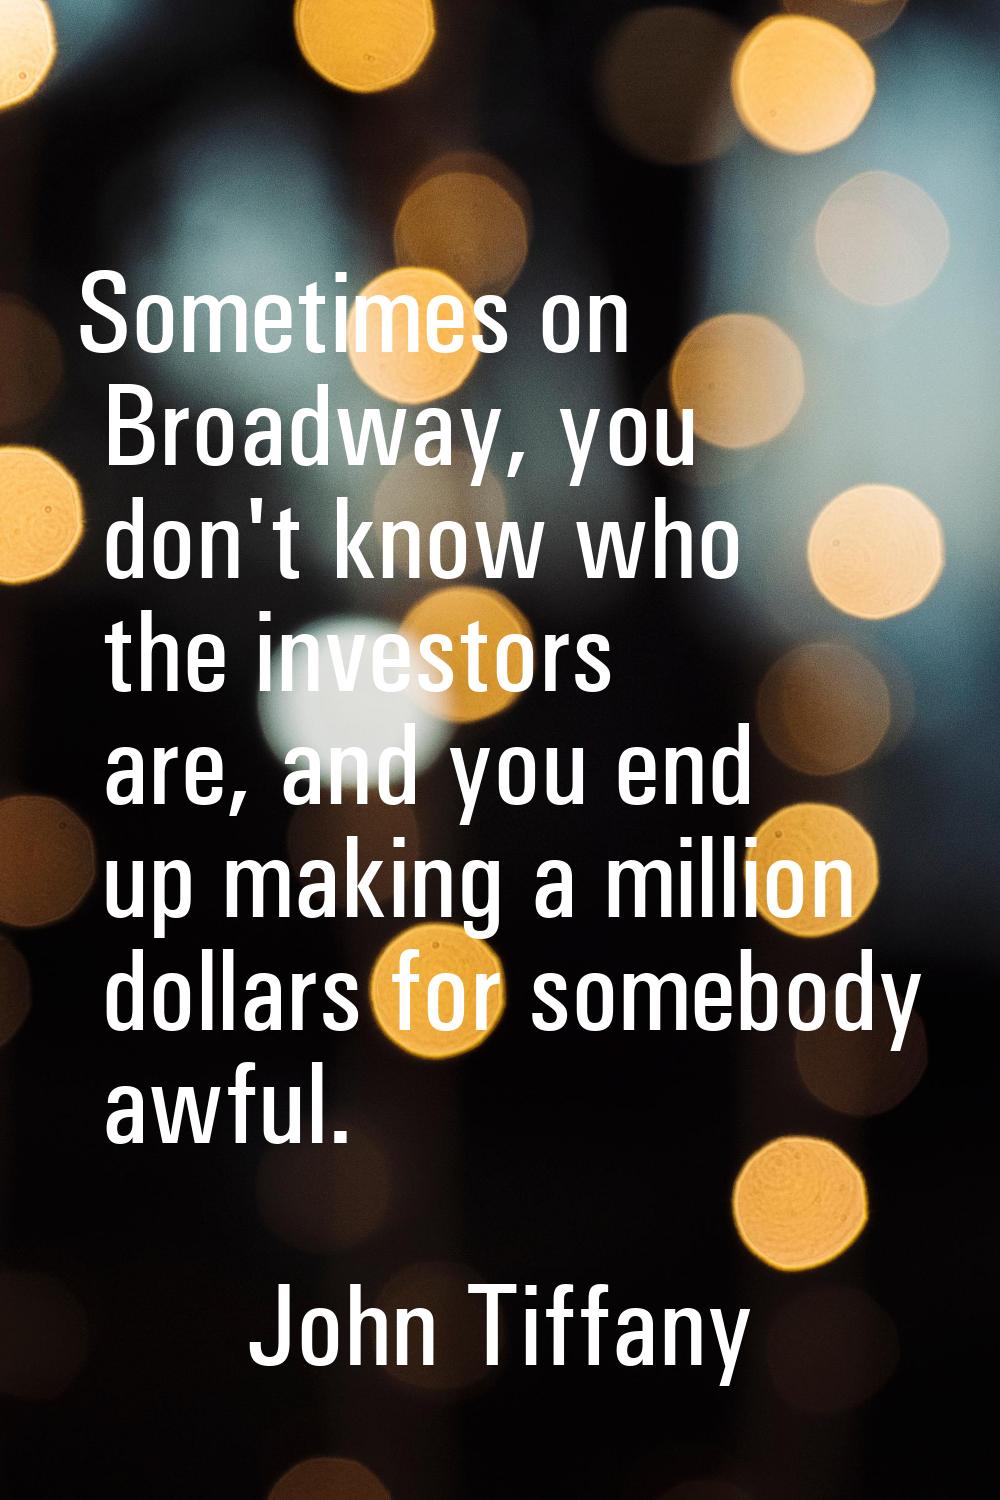 Sometimes on Broadway, you don't know who the investors are, and you end up making a million dollar